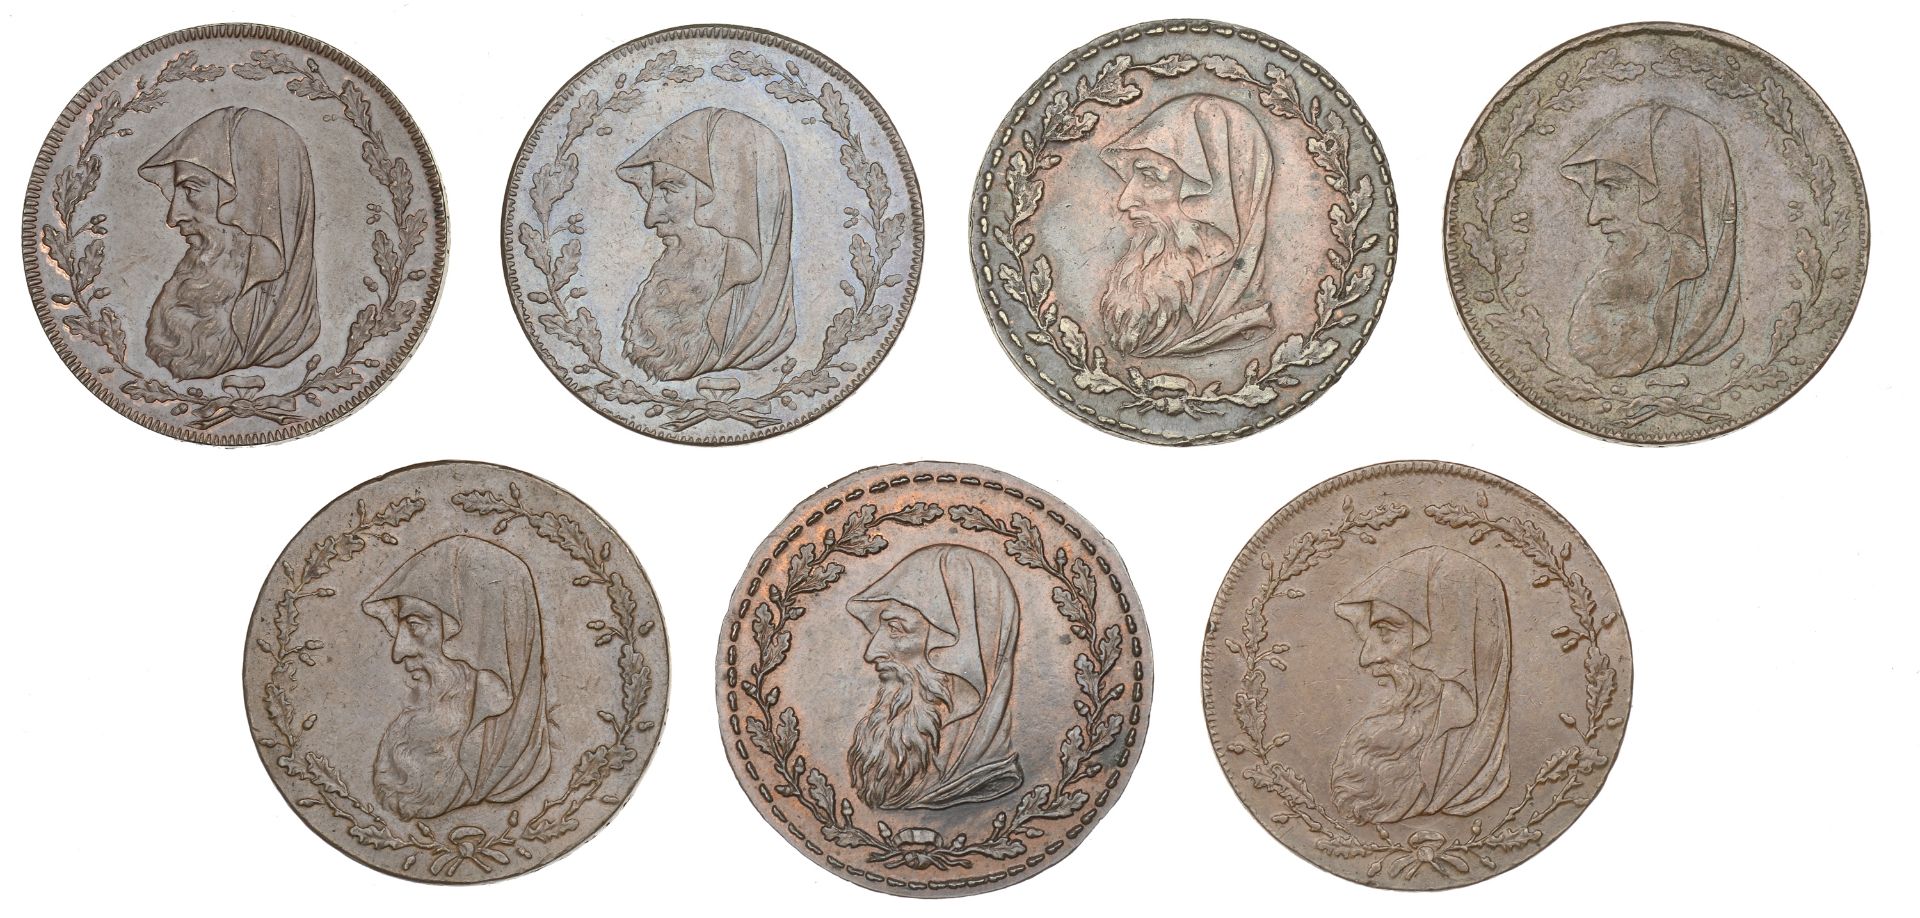 The Collection of 18th Century Tokens formed by Ken Elks